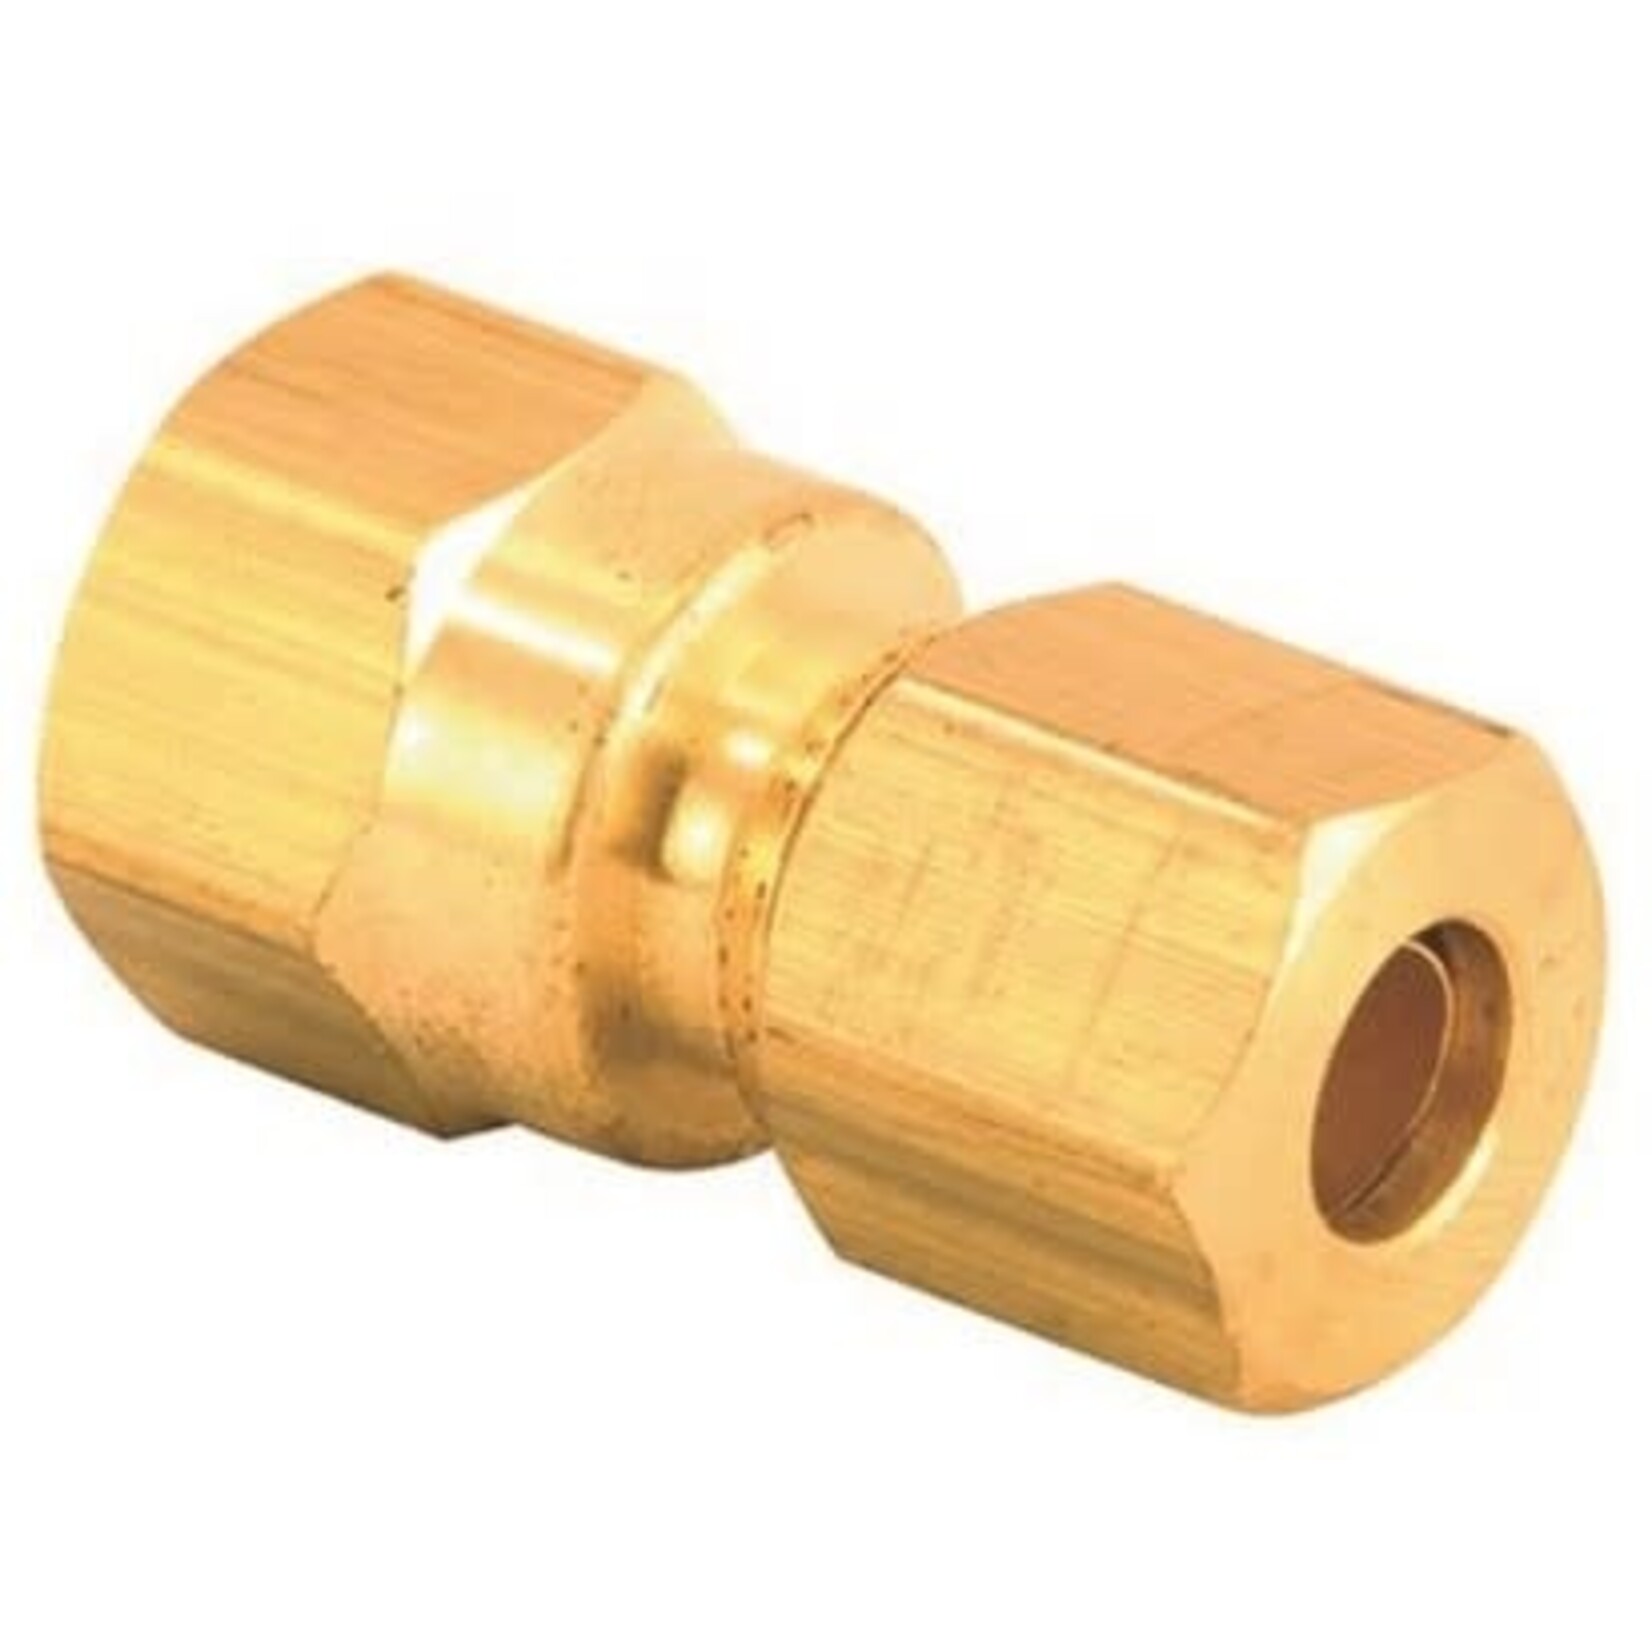 PROPLUS 1/4 IN X 1/2 IN BRASS COMPRESSION FEMALE ADAPTER